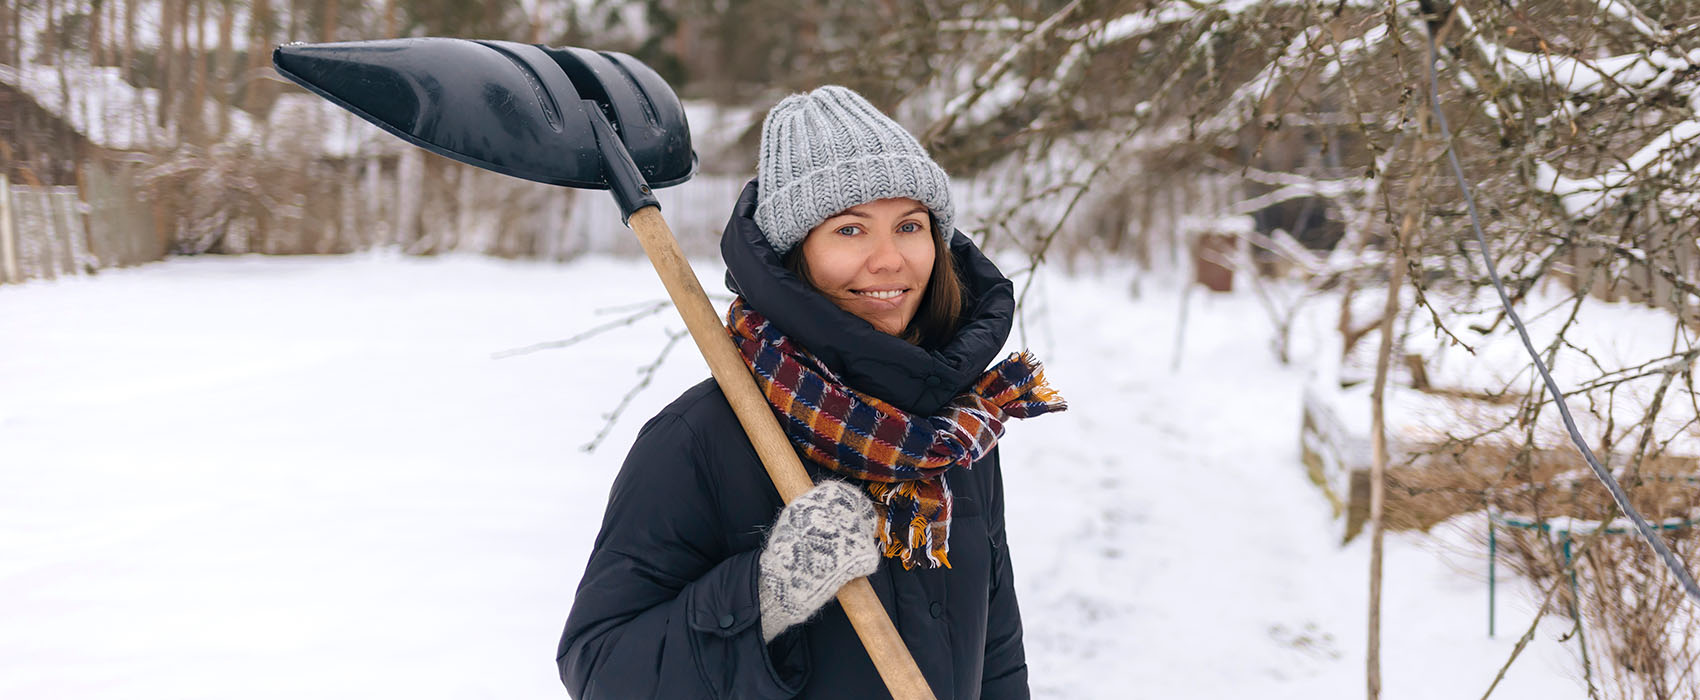 Woman stands in snow with shovel slung over her shoulder